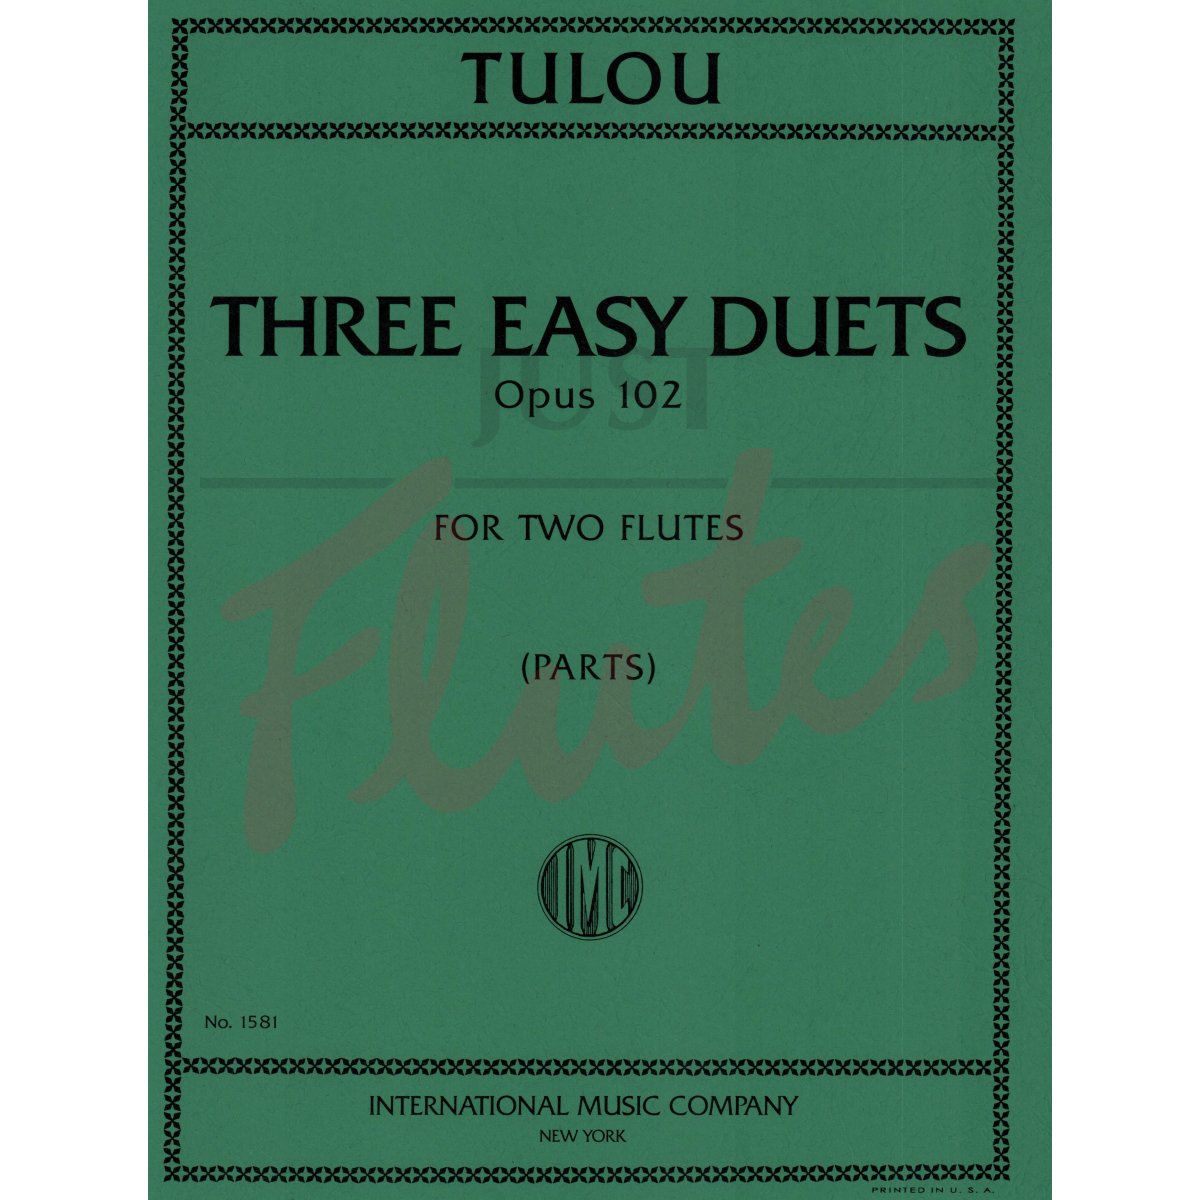 Three Easy Duets for Two Flutes